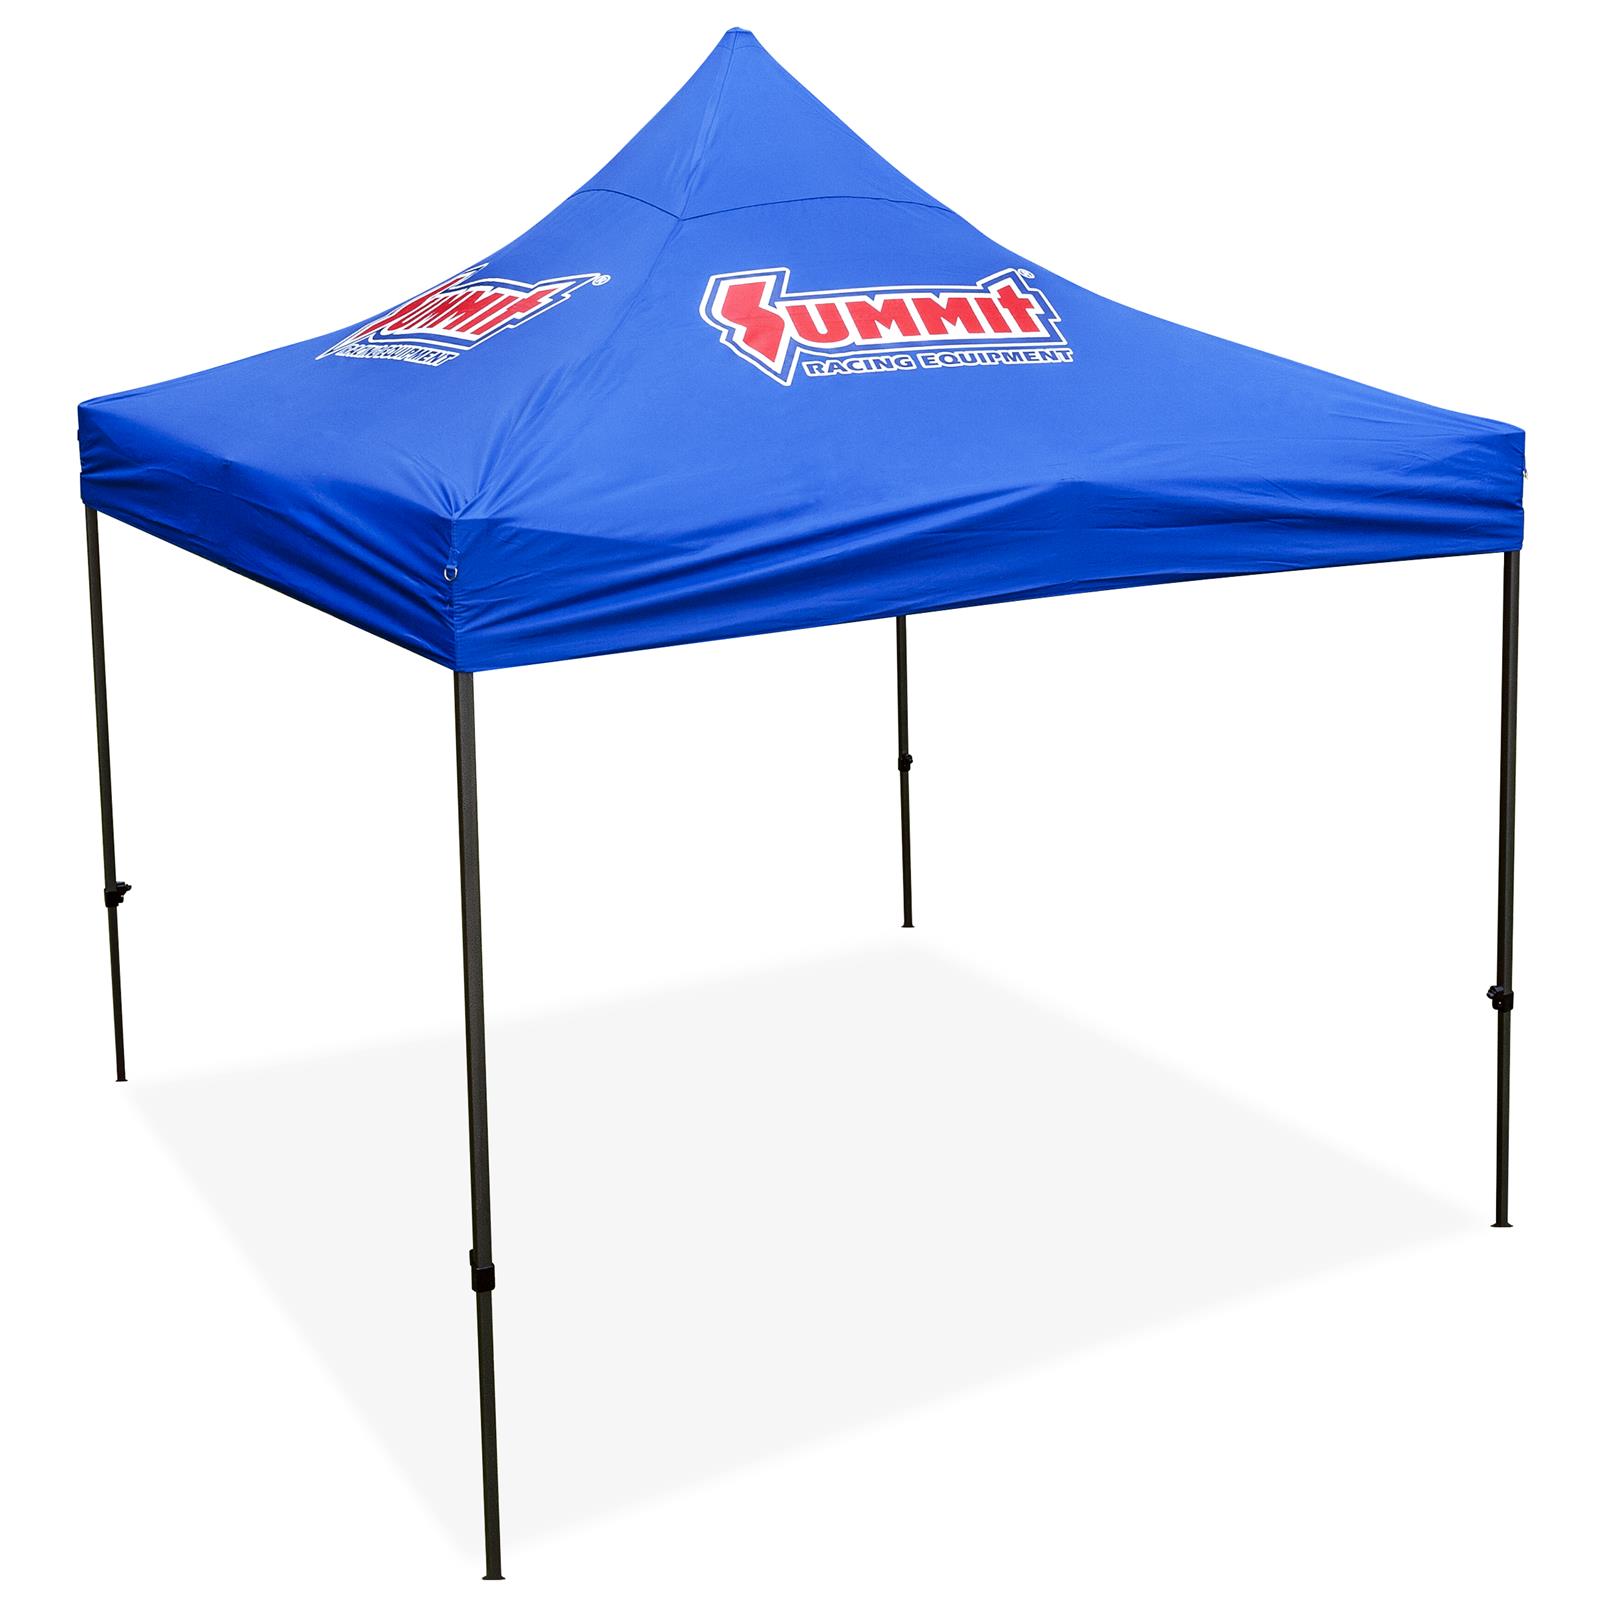 Summit Racing® 20 X 10 Pop Up Canopy Tents Sum 941622 Free Shipping